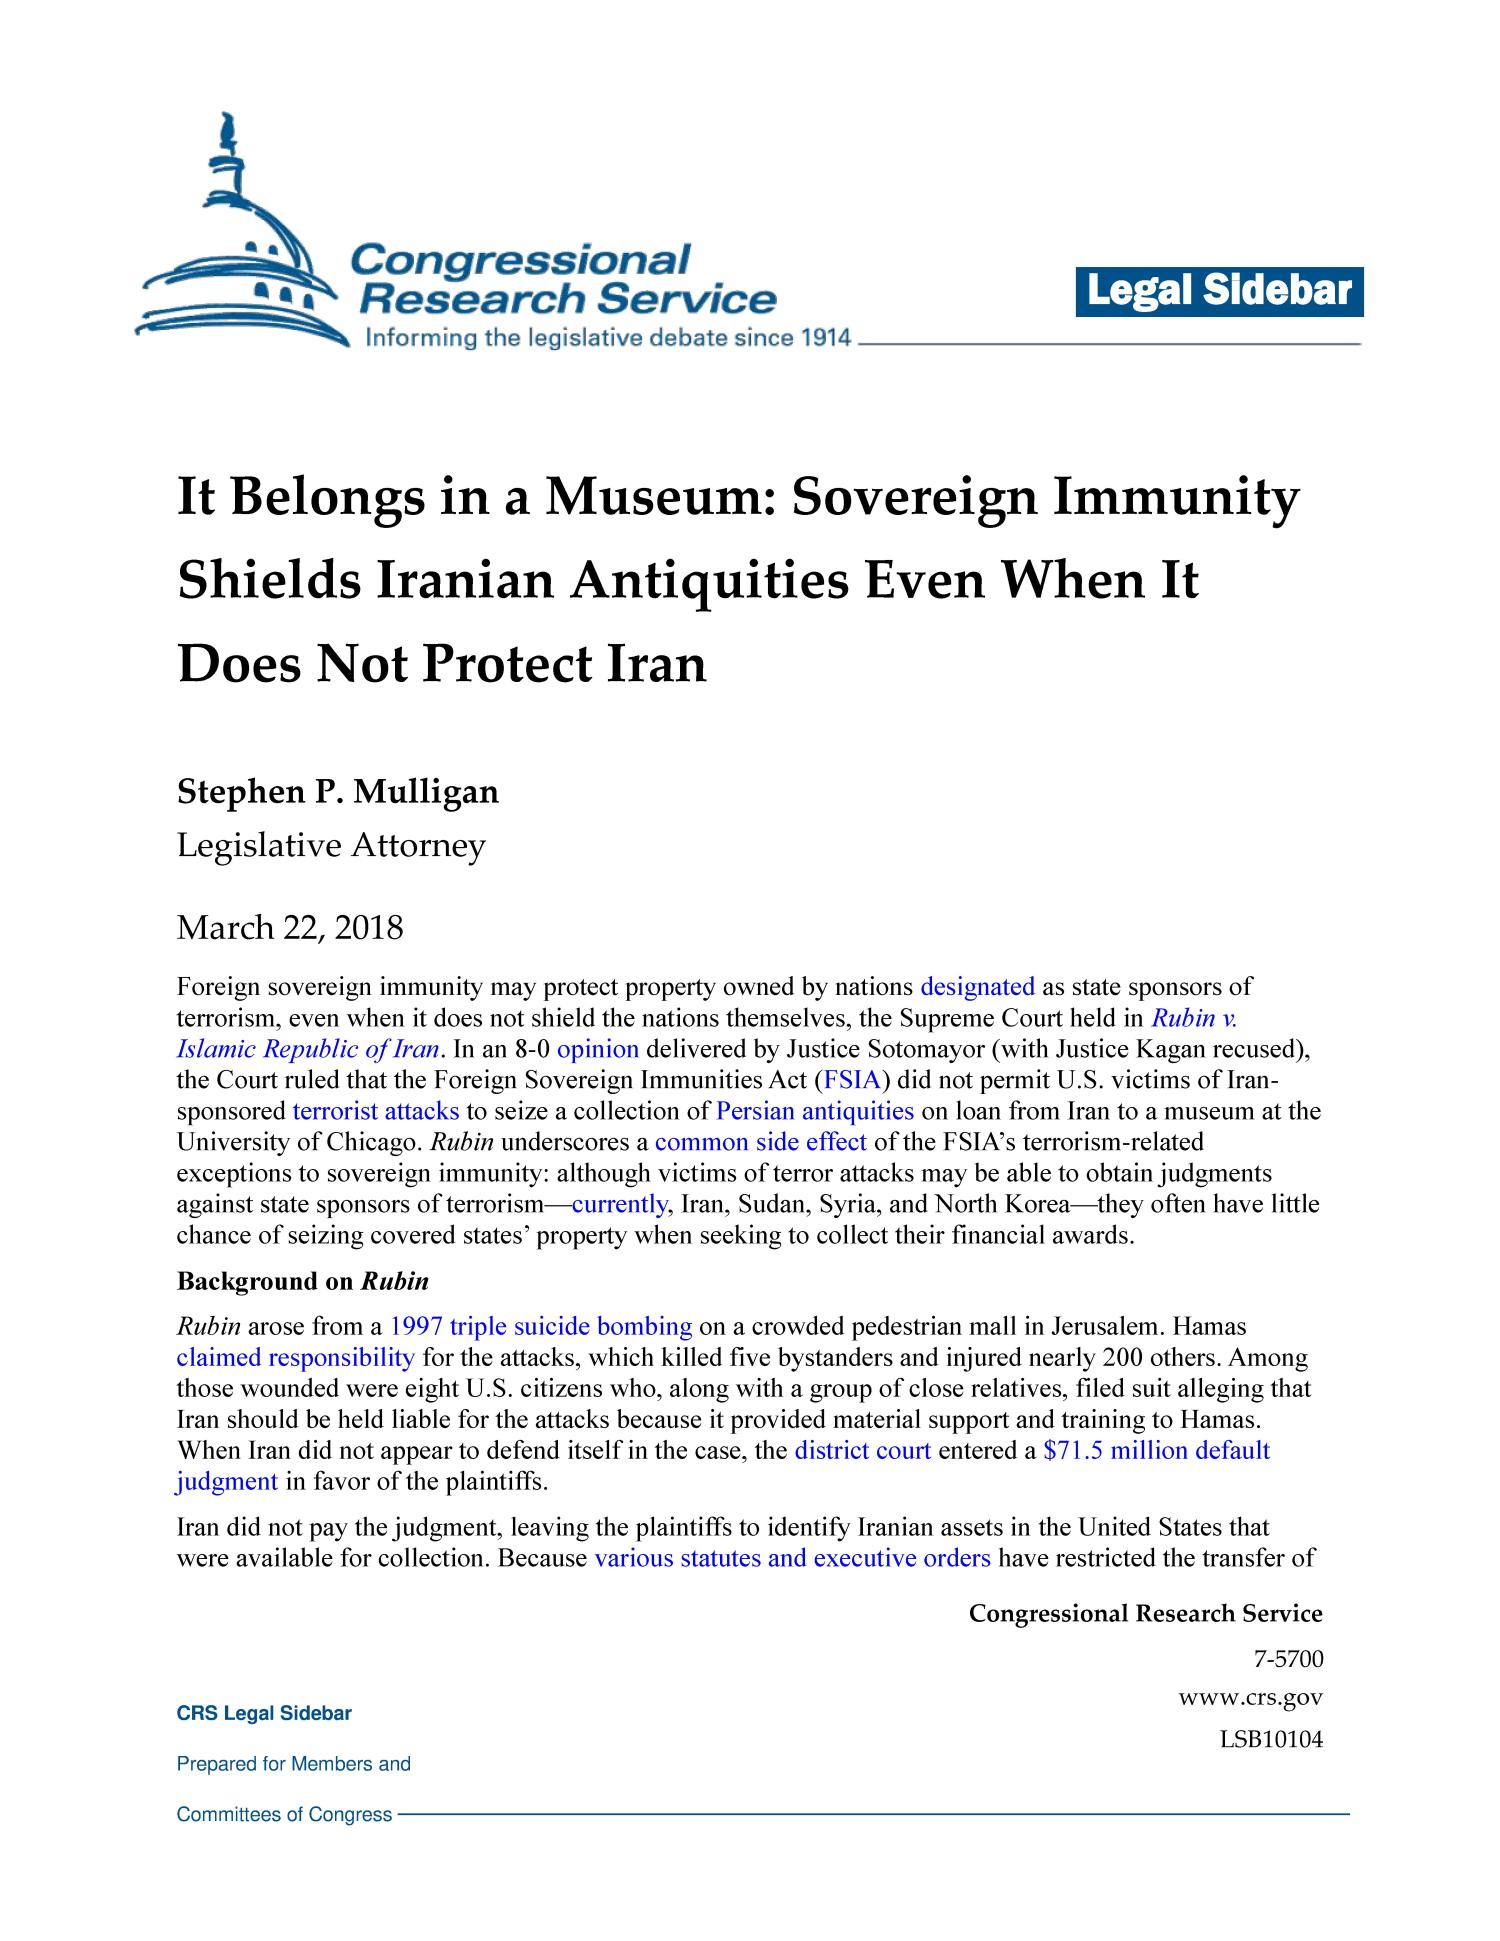 It Belongs in a Museum: Sovereign Immunity Shields Iranian Antiquities Even When It Does Not Protect Iran
                                                
                                                    [Sequence #]: 1 of 3
                                                